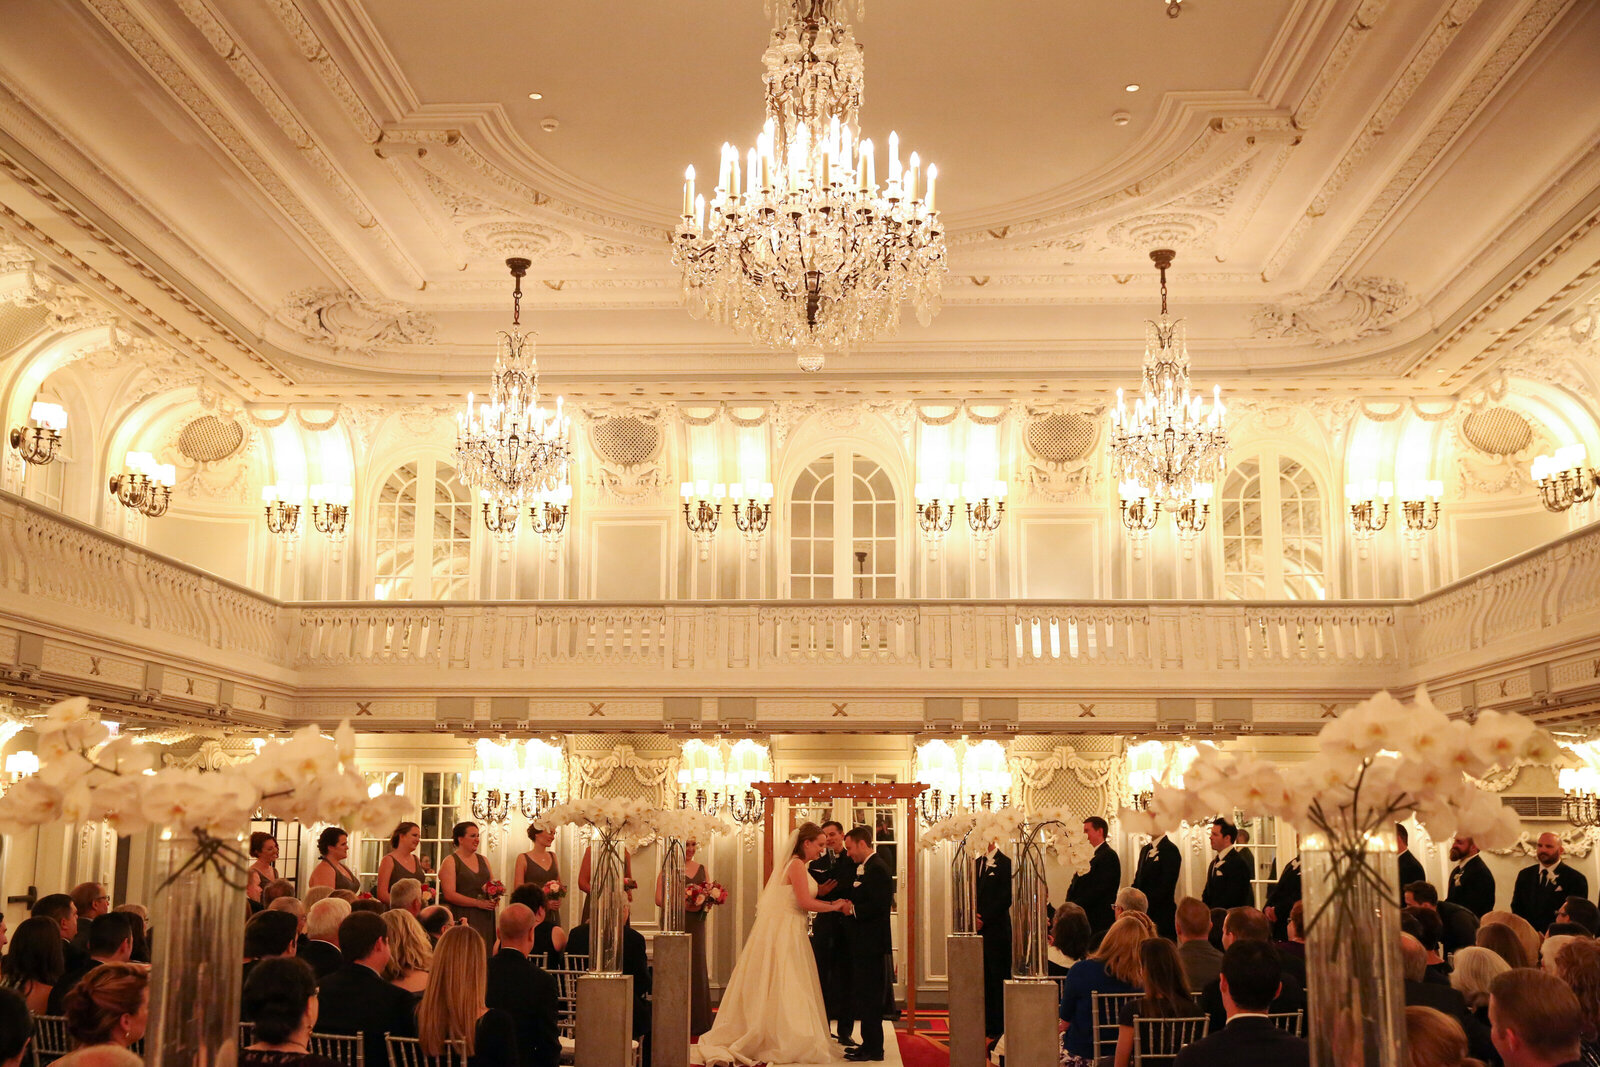 Bride and groom take their vows in grand ballroom